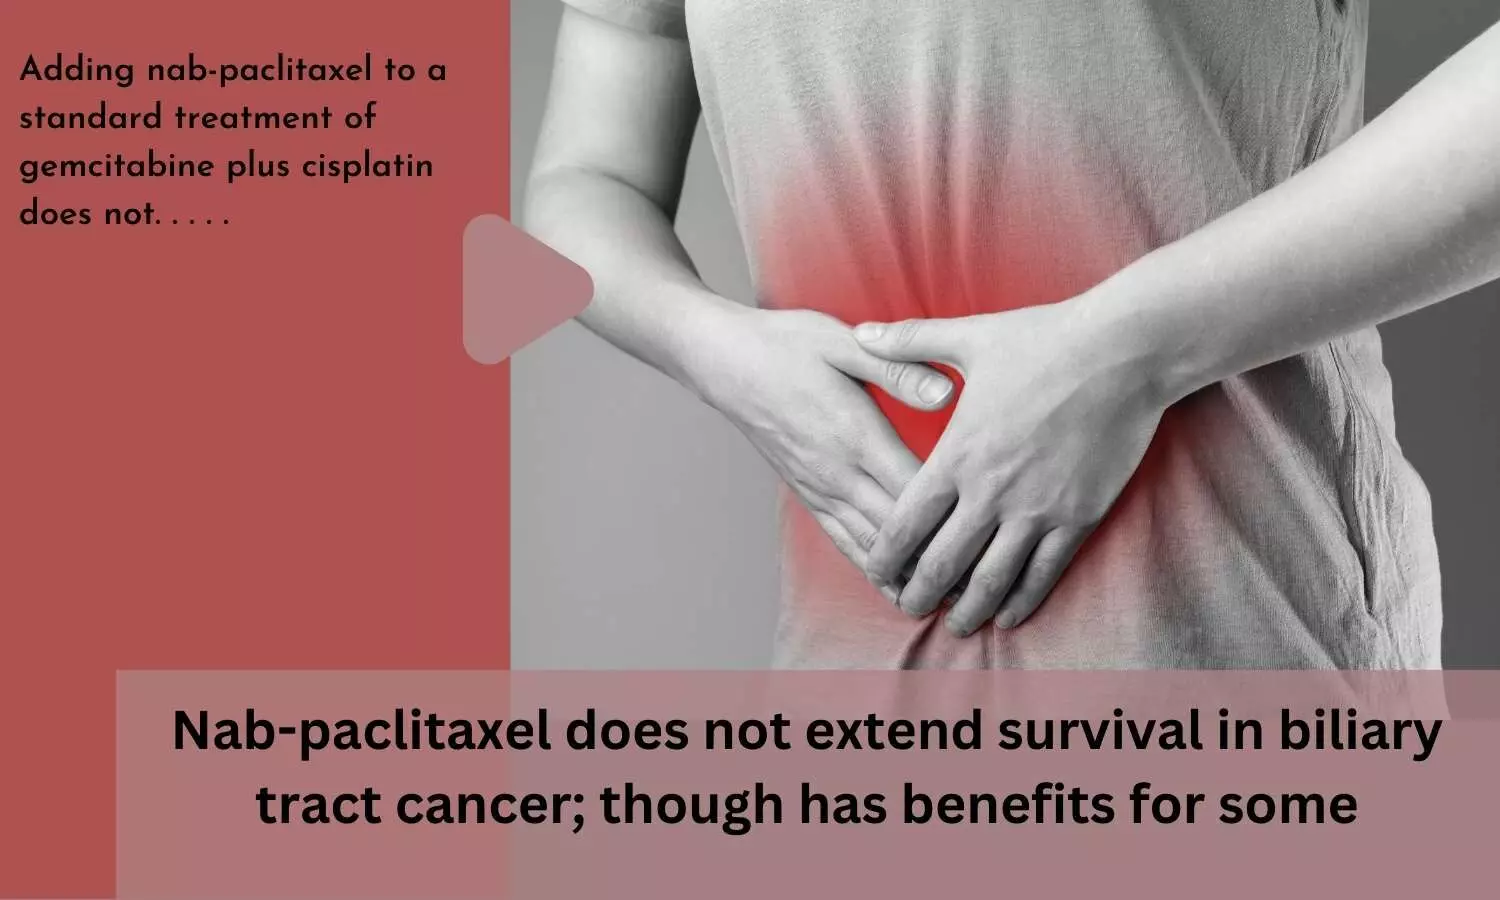 Nab-paclitaxel does not extend survival in biliary tract cancer; though has benefits for some